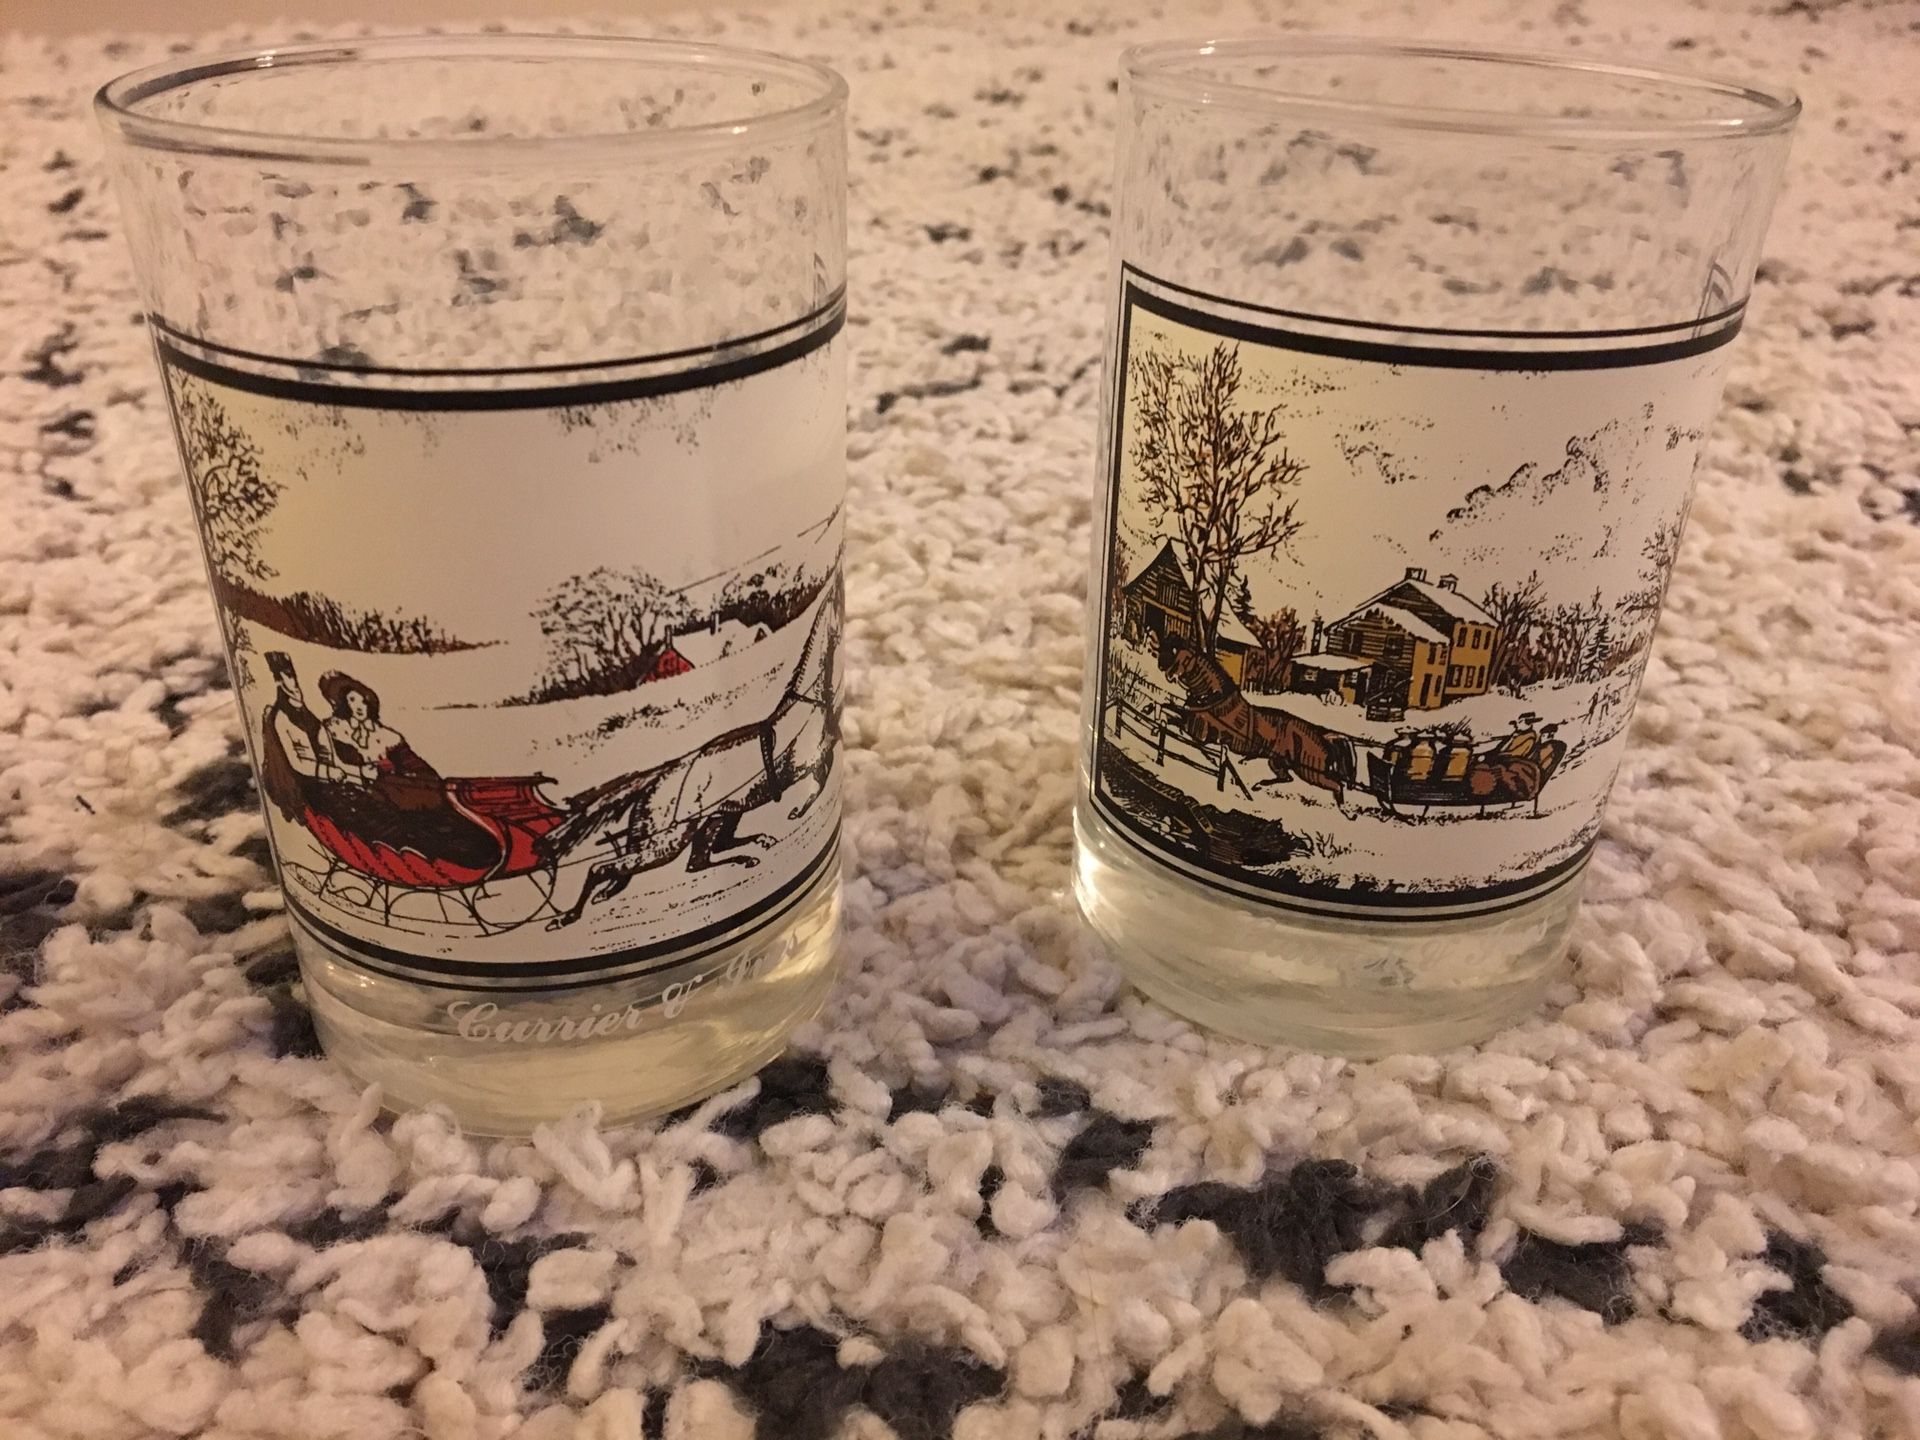 Collectible Arby's cups from 1978